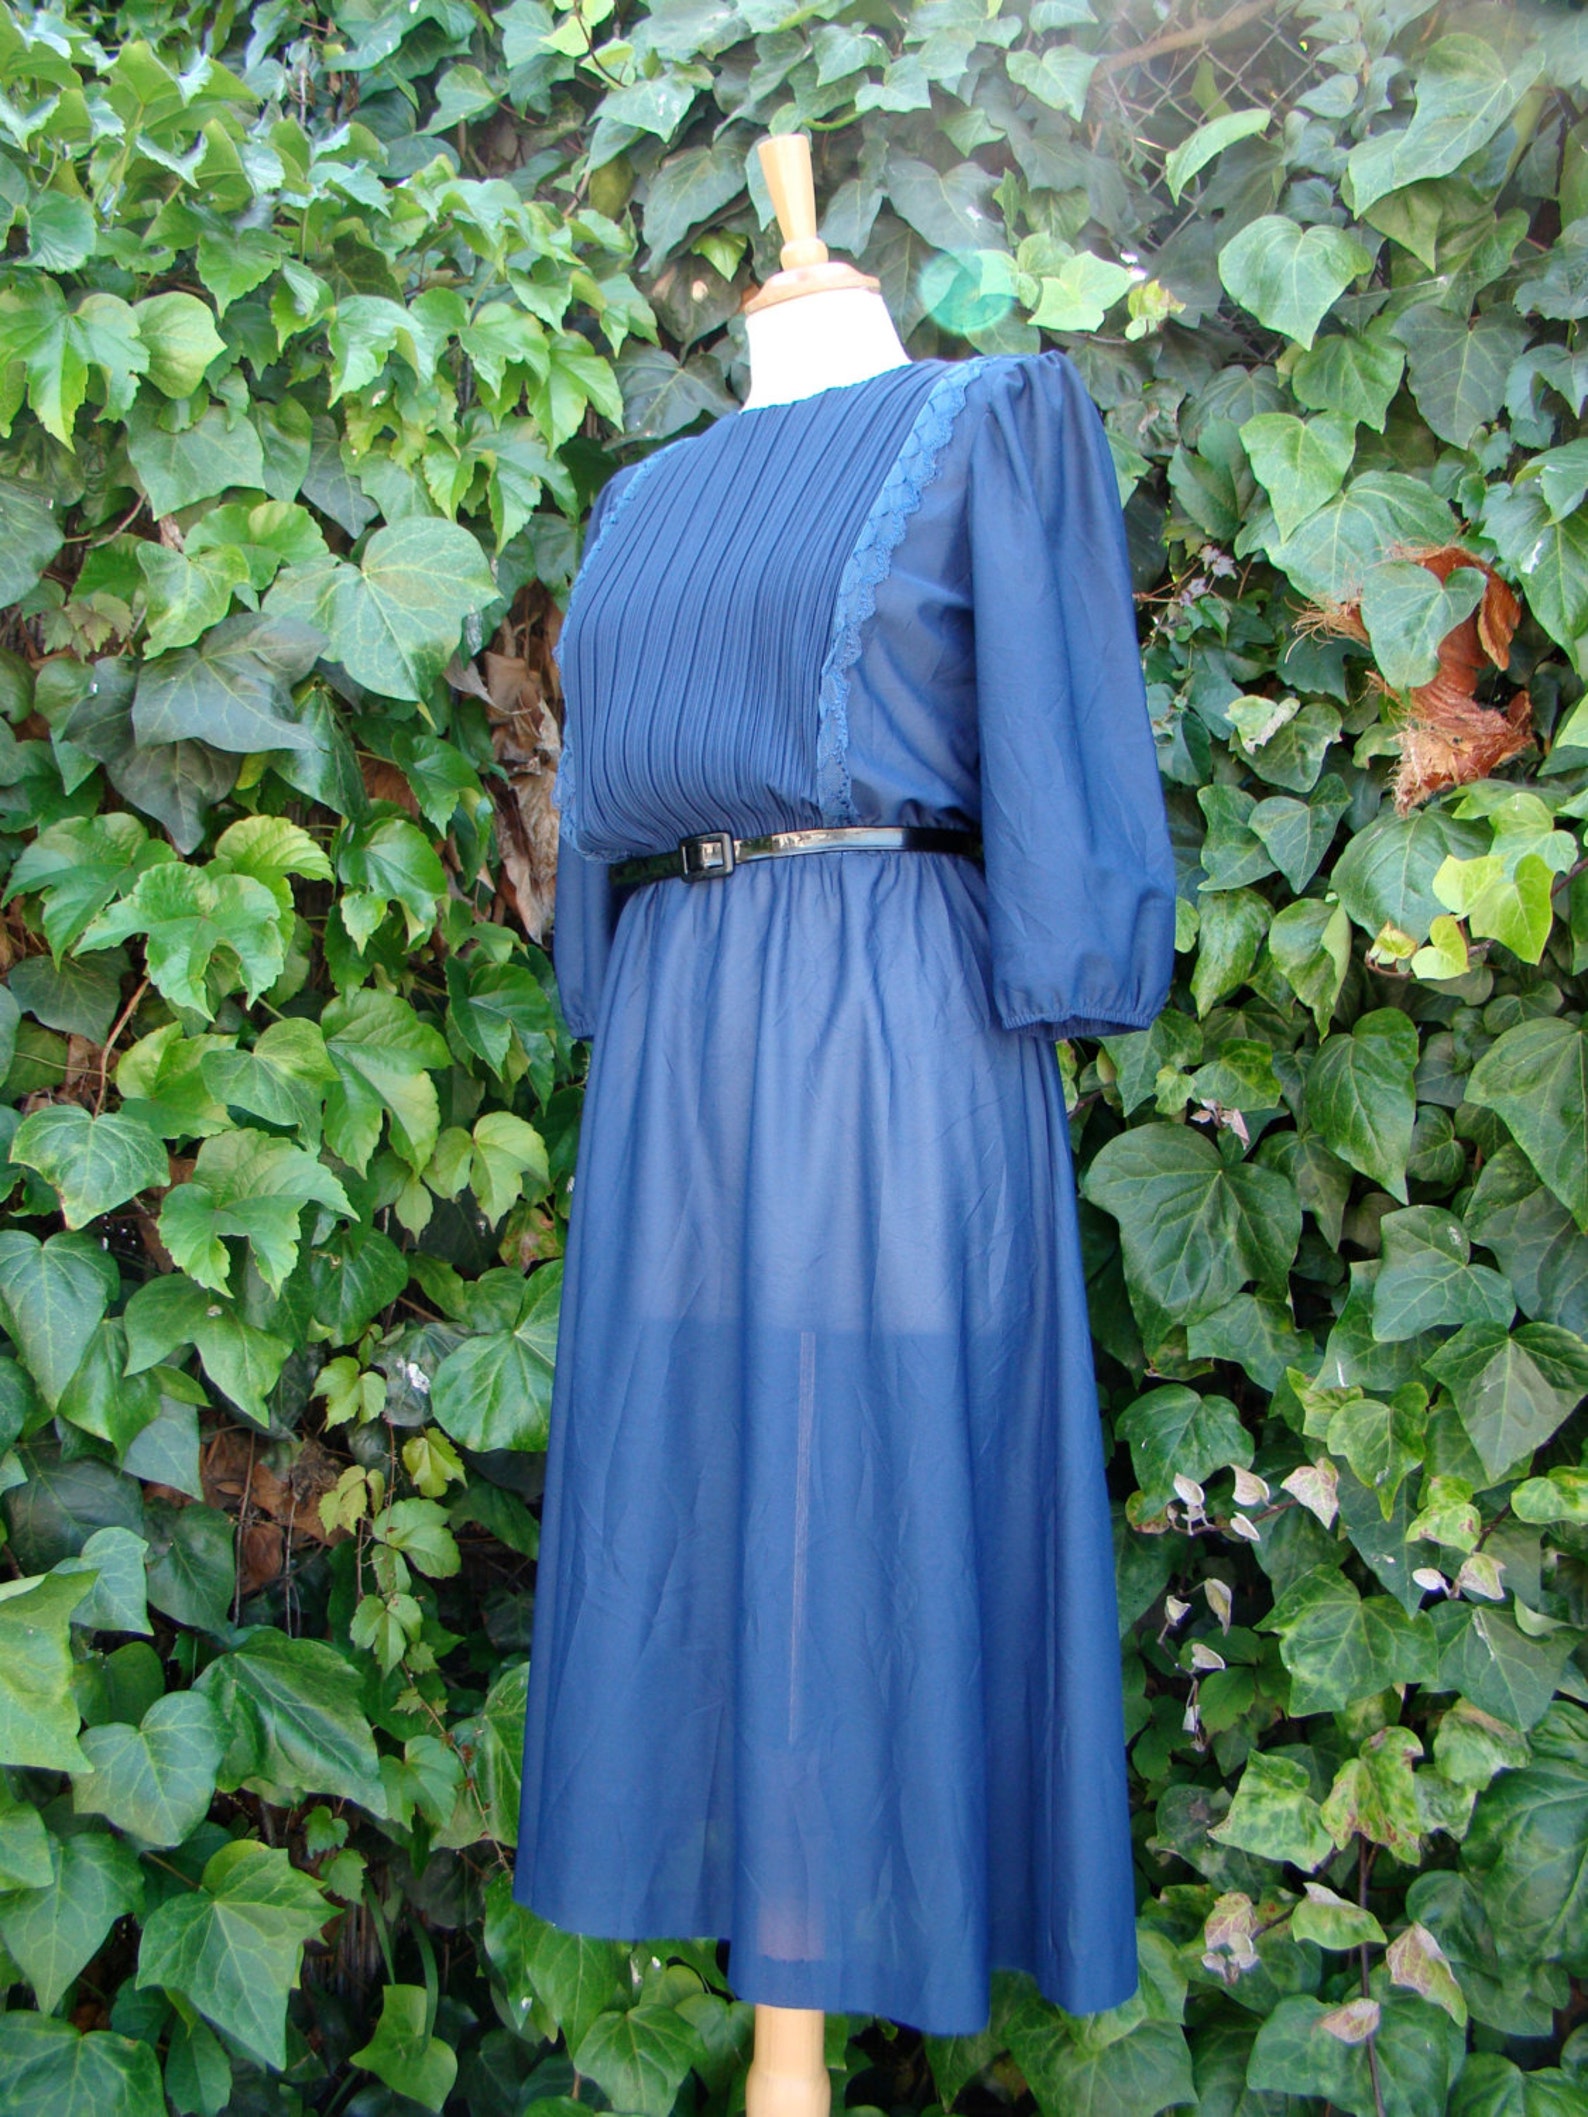 Vintage 70s / Navy Blue / Puffed Sleeve / Accordion Pleat/ | Etsy